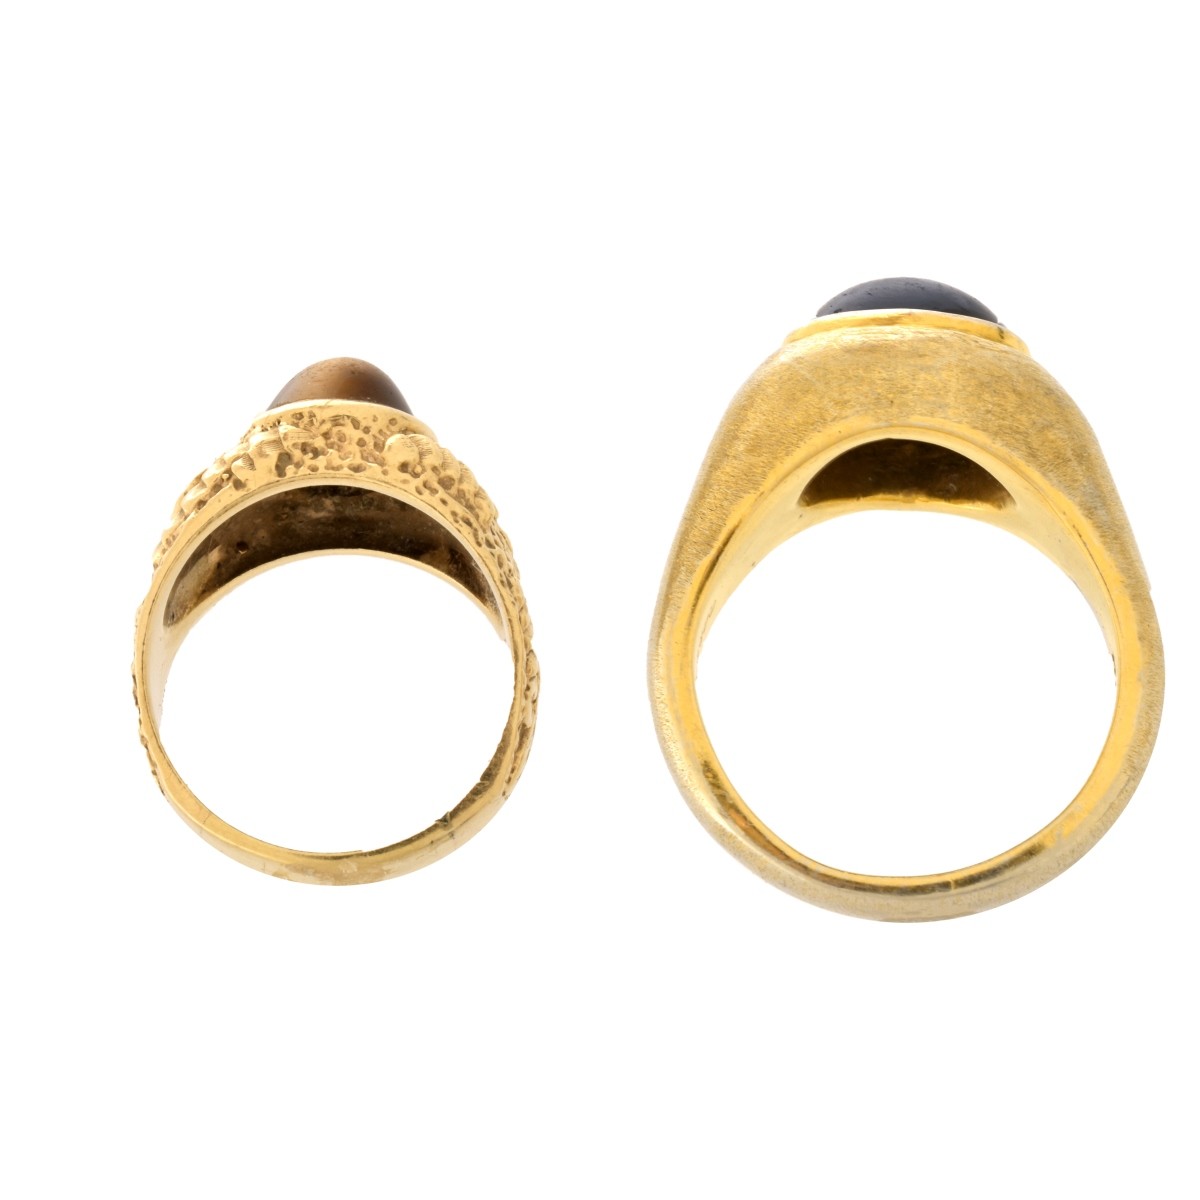 Two Men's 14K and Gemstone Rings